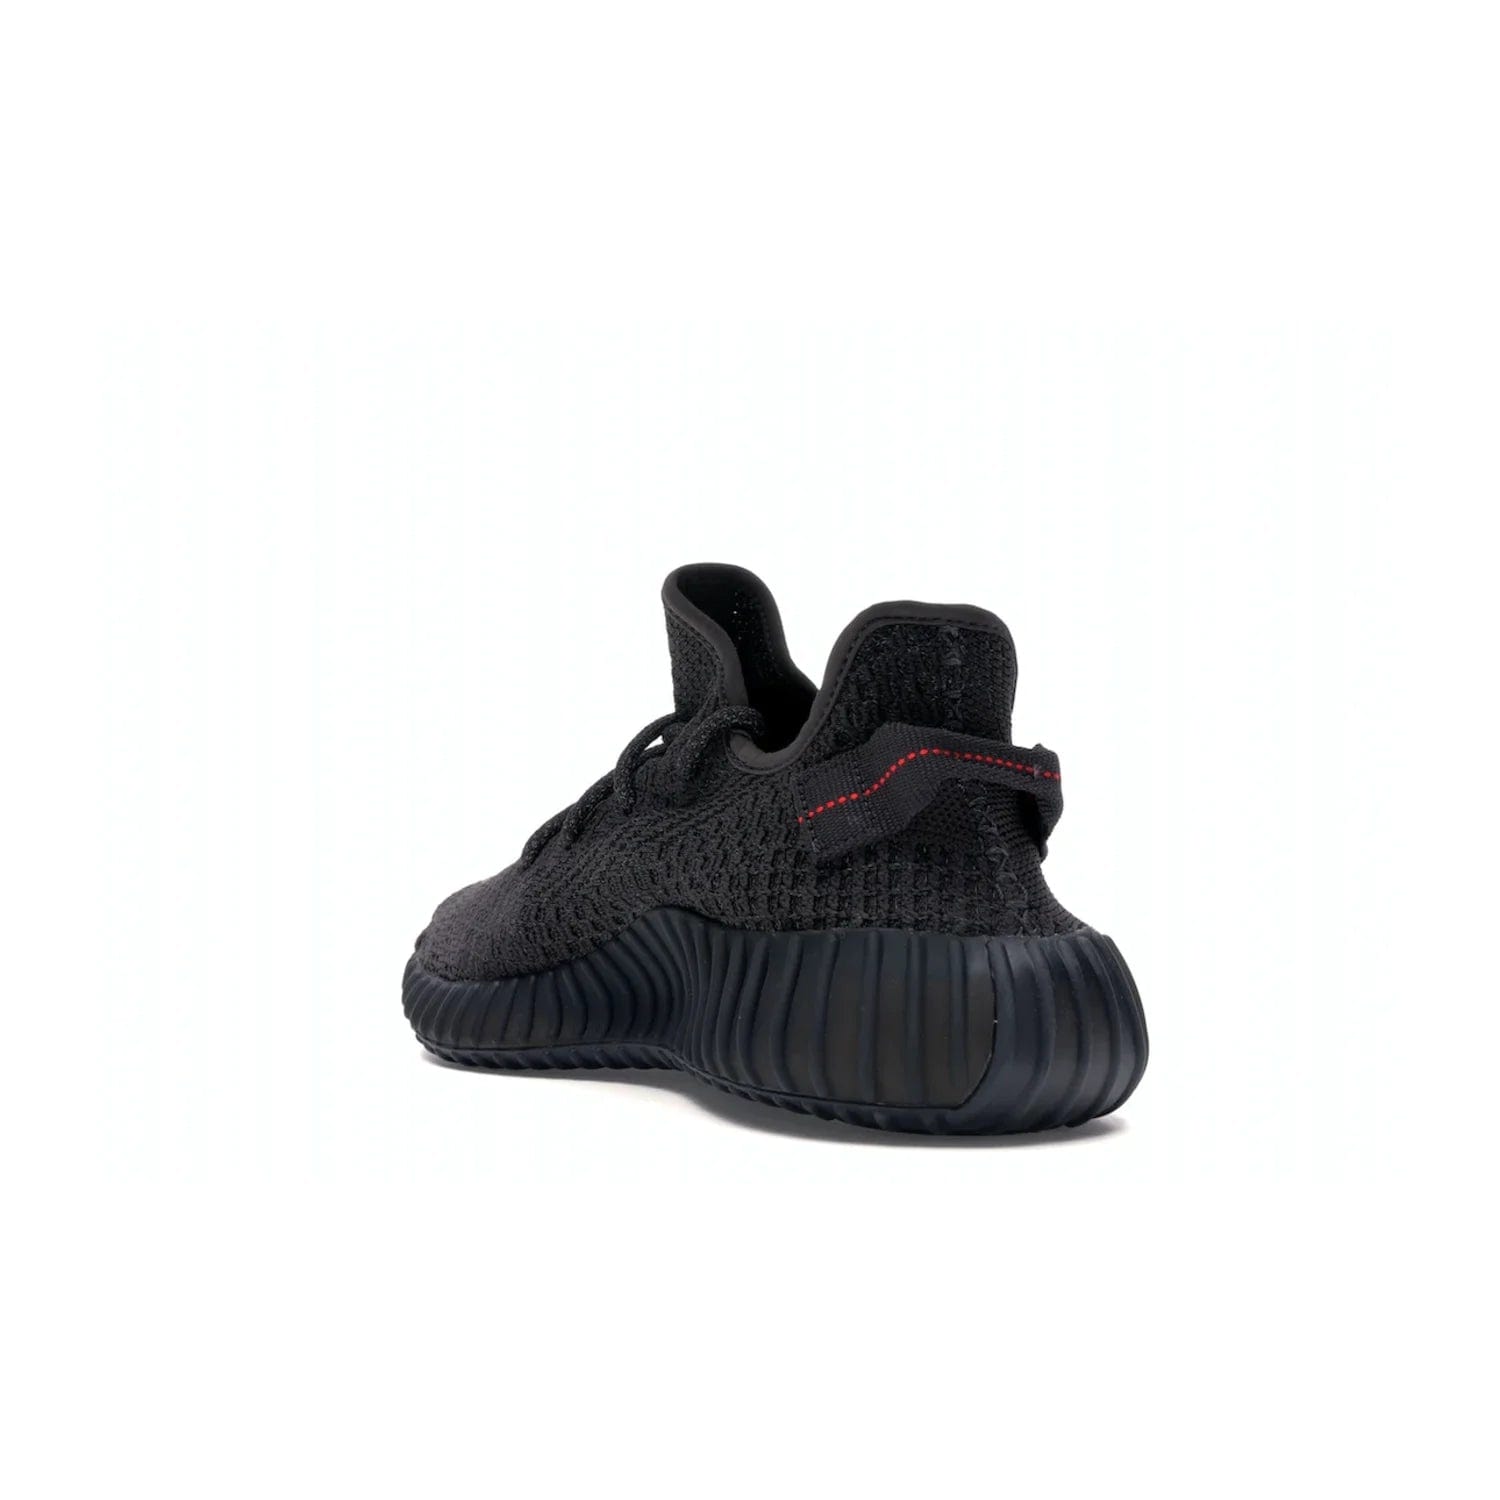 adidas Yeezy Boost 350 V2 Static Black (Reflective) - Image 25 - Only at www.BallersClubKickz.com - Make a statement with the adidas Yeezy Boost 350 V2 Static Black Reflective. All-black upper, reflective accents, midsole, and sole combine for a stylish look. High quality materials. June 2019 release. Add to your collection today.